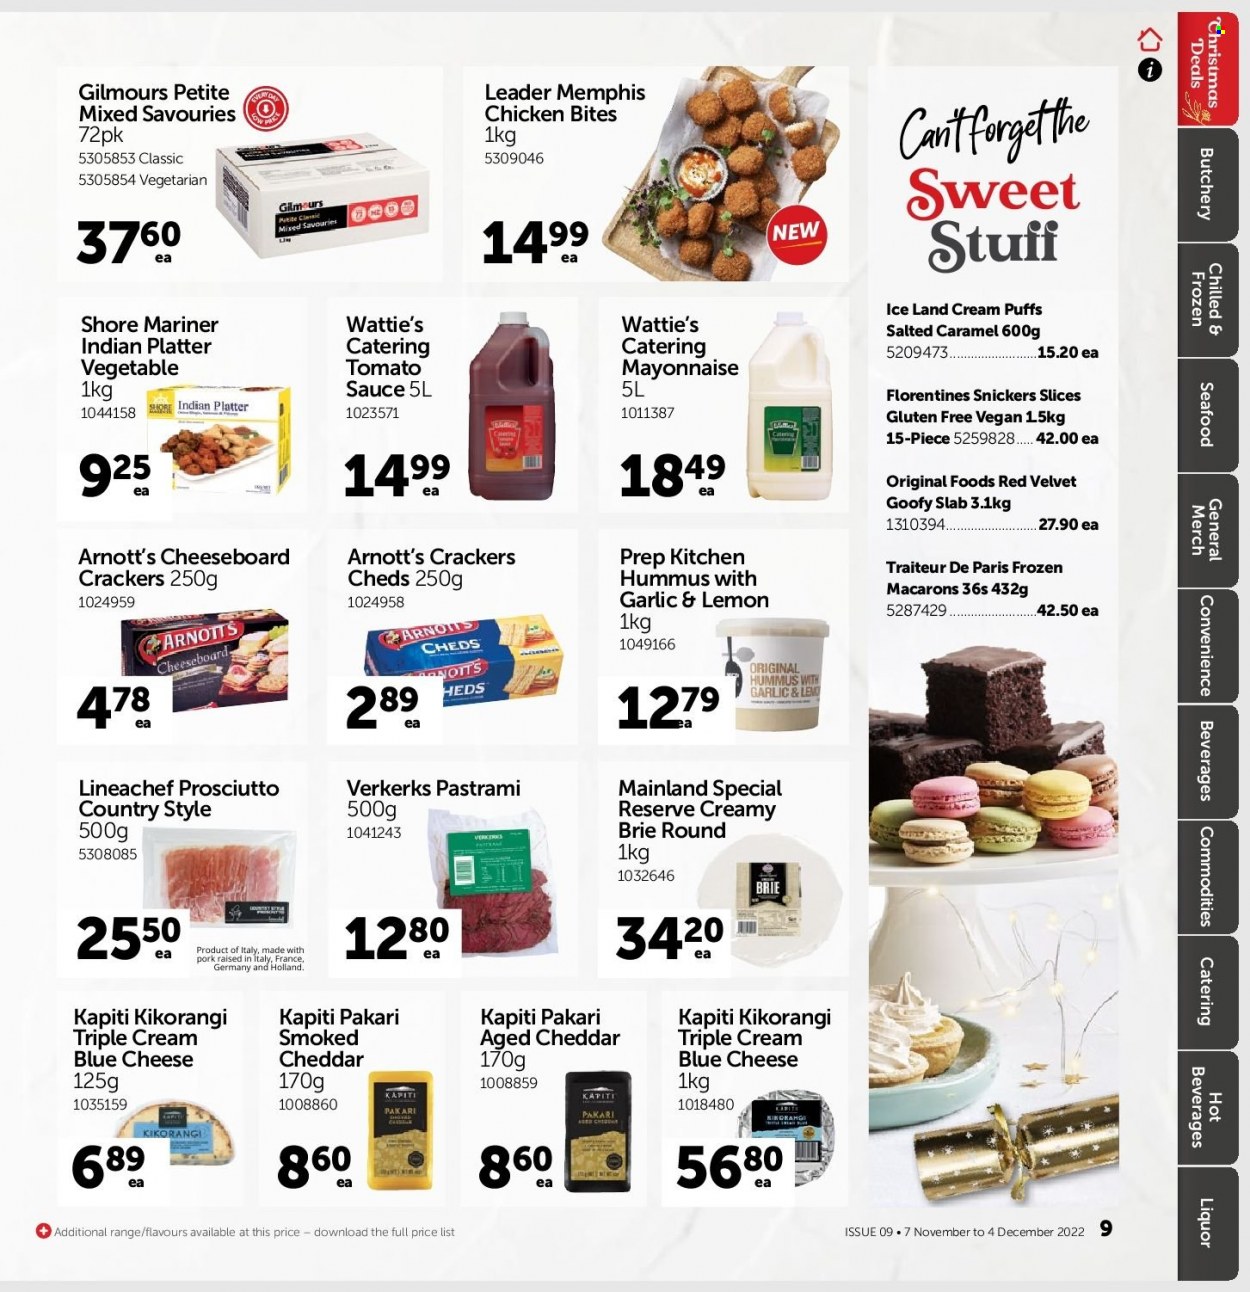 Gilmours mailer - 07.11.2022 - 04.12.2022 - Sales products - Puffs, cream puffs, seafood, Shore Mariner, sauce, Wattie's, prosciutto, pastrami, hummus, blue cheese, cheddar, cheese, brie cheese, mayonnaise, chicken bites, Snickers, crackers, tomato sauce, liquor, beef meat. Page 8.